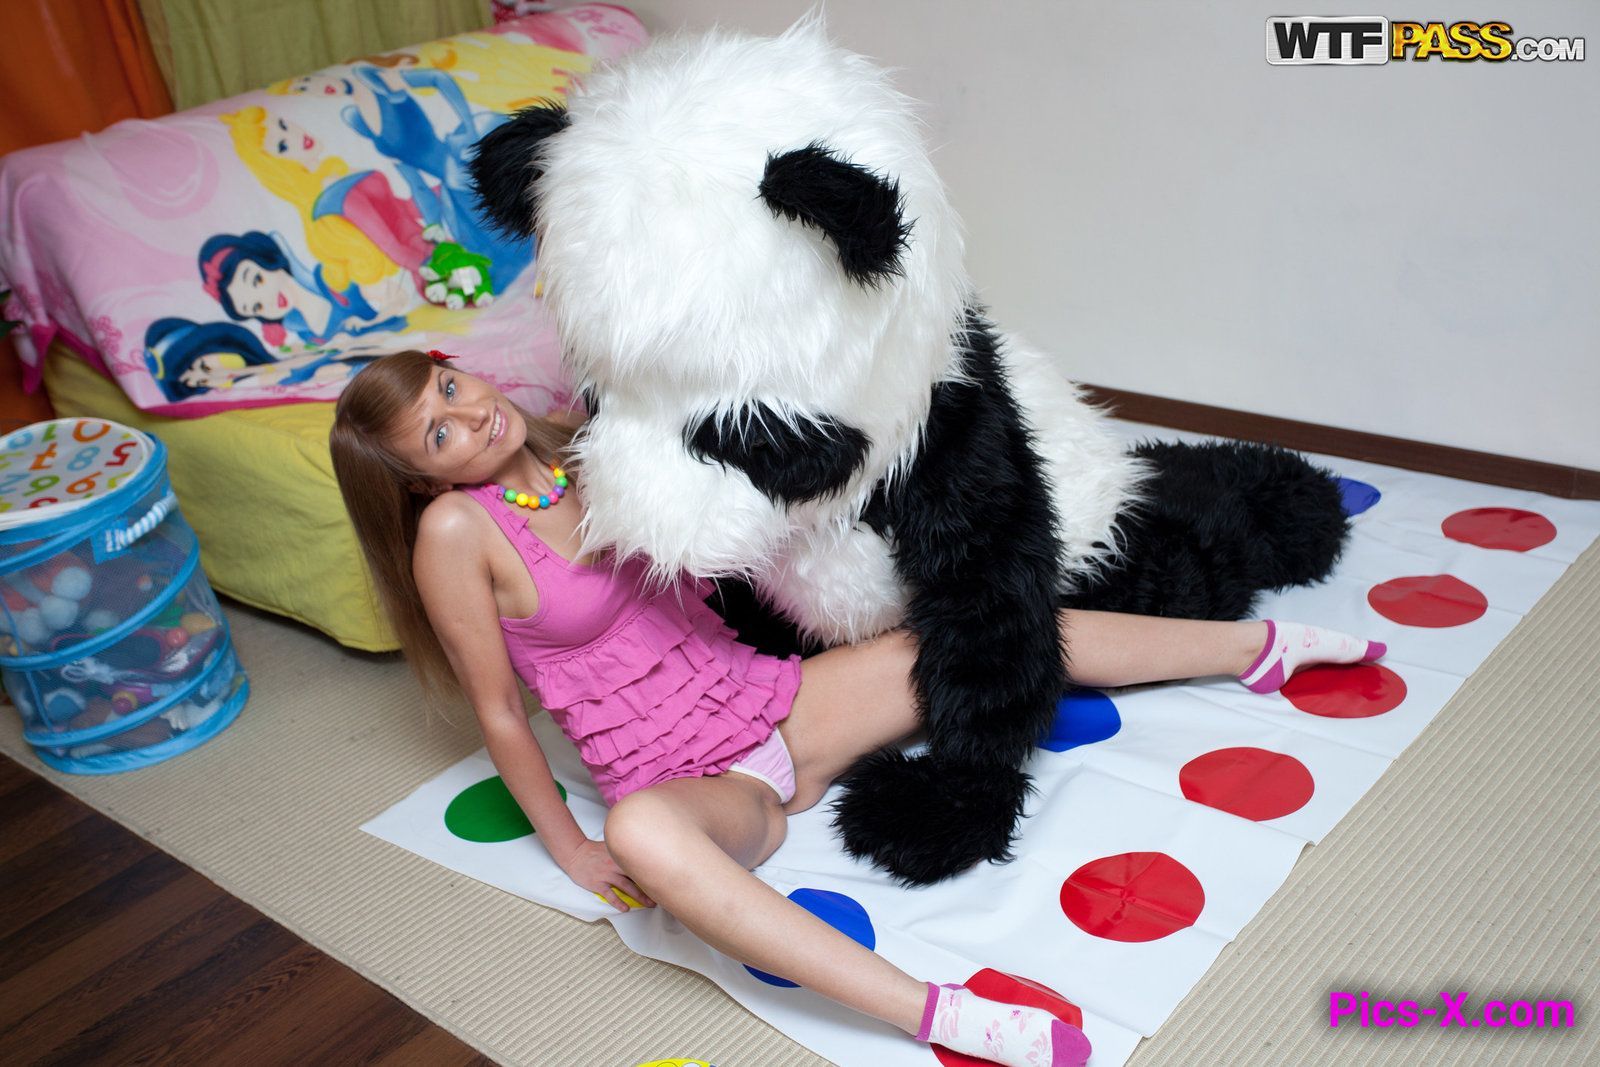 Chick plays with unusual sex toy - Panda Fuck - Image 13